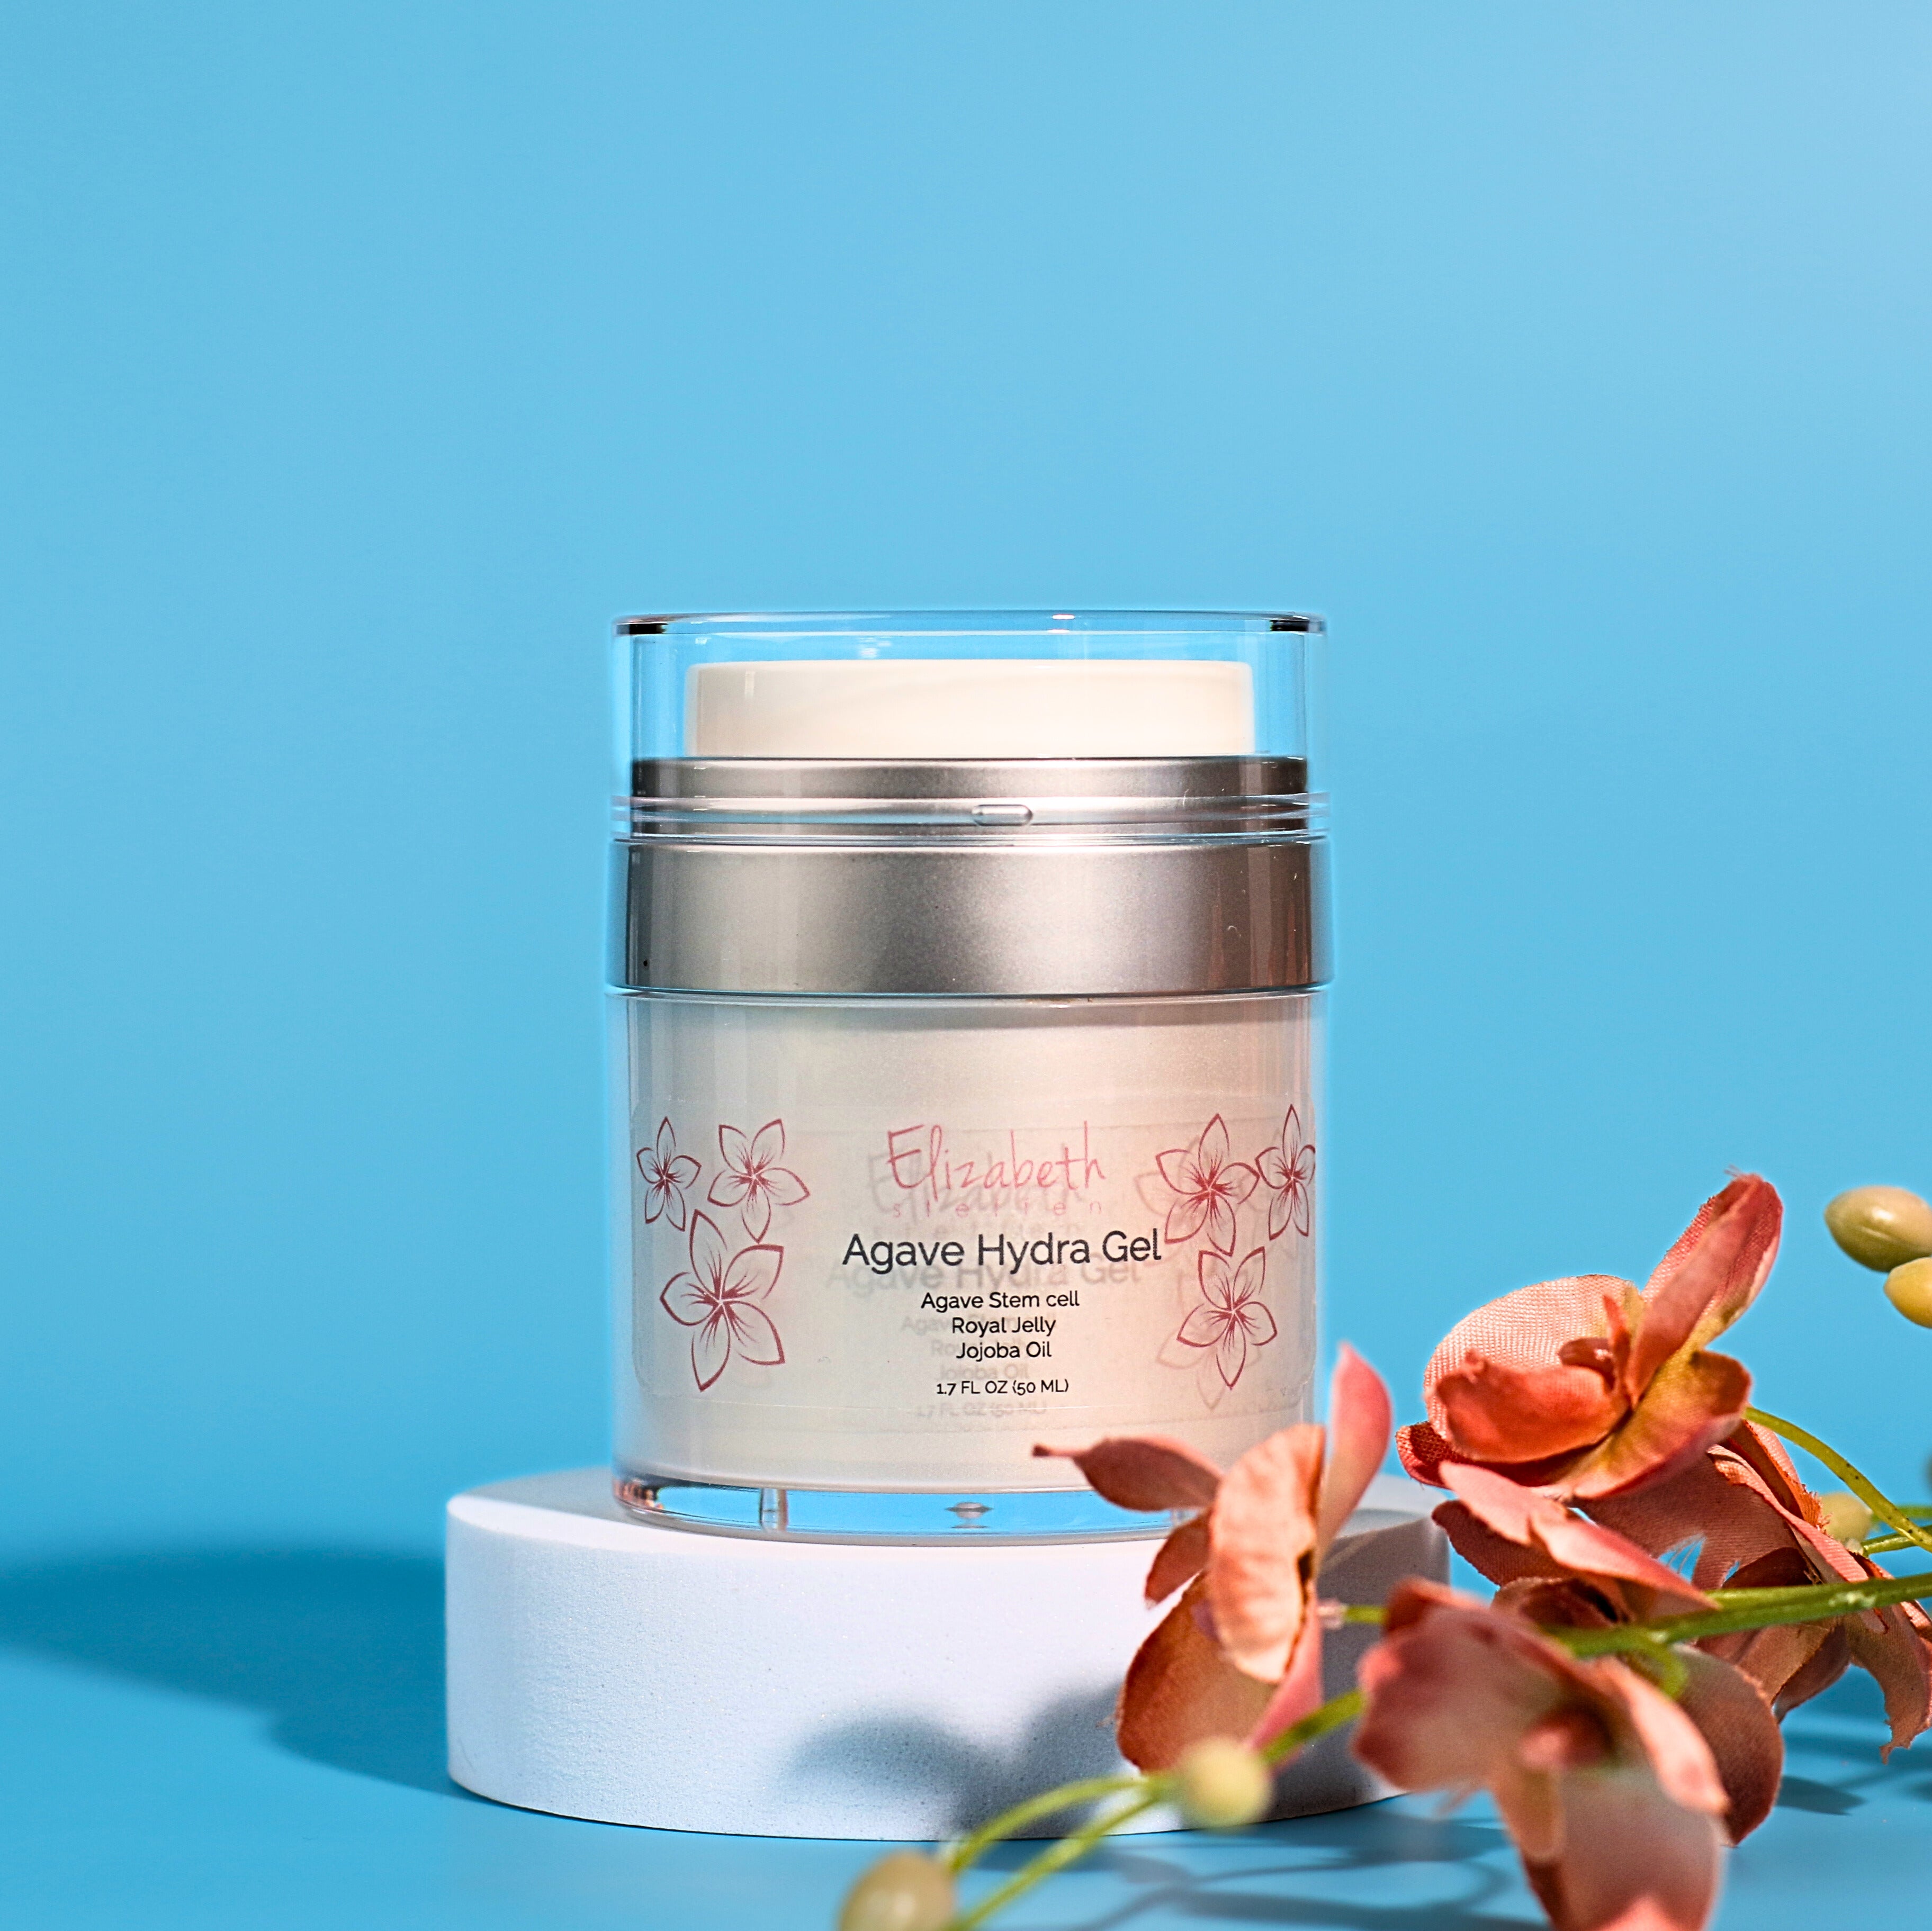 Rejuvenating skincare product with agave stem cells, bee complex, and bamboo extract for hydrated, youthful-looking skin.